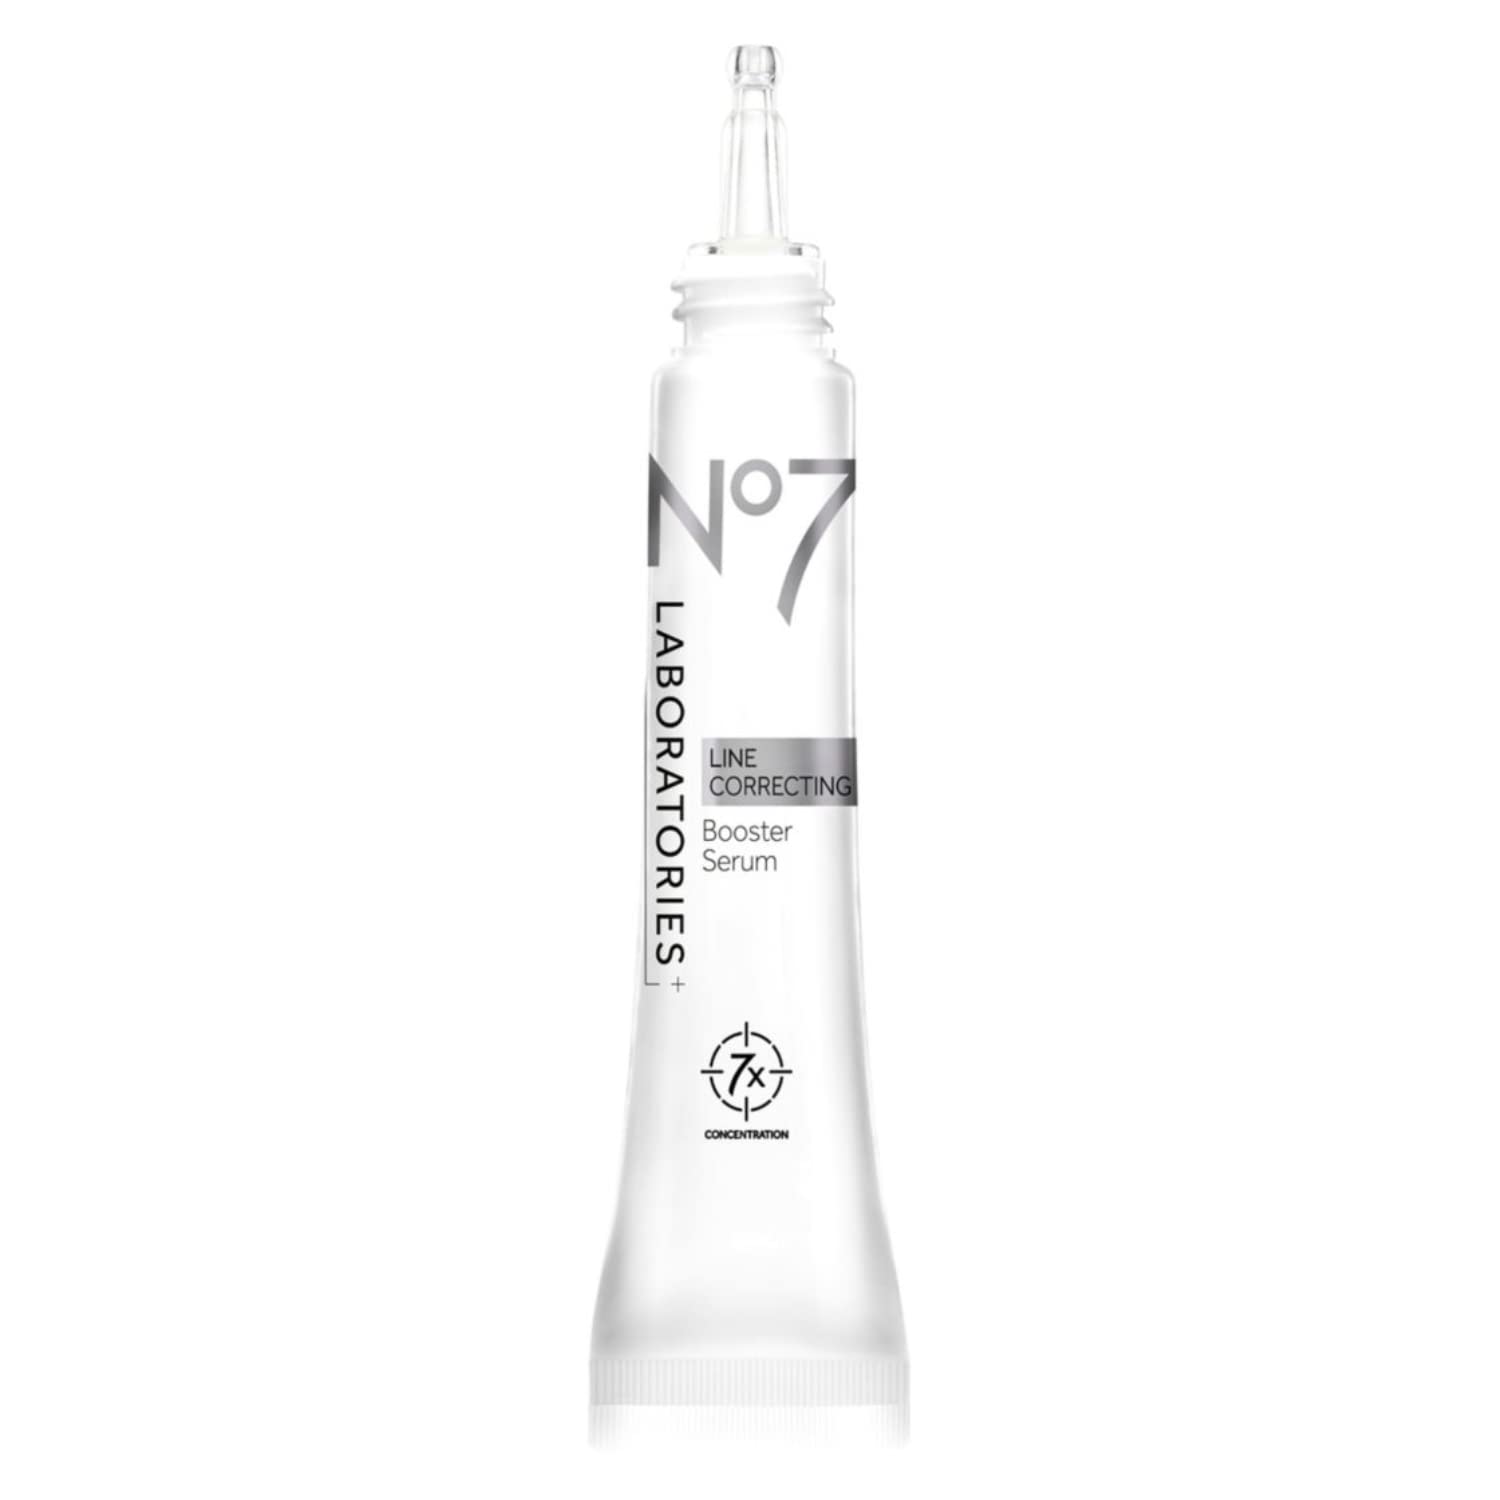 No7 Laboratories Line Correcting Booster Serum - Potent Collagen Peptide Serum for Fine Lines and Wrinkles - Moisturizing Formula for All Aging Skin Types (25 )